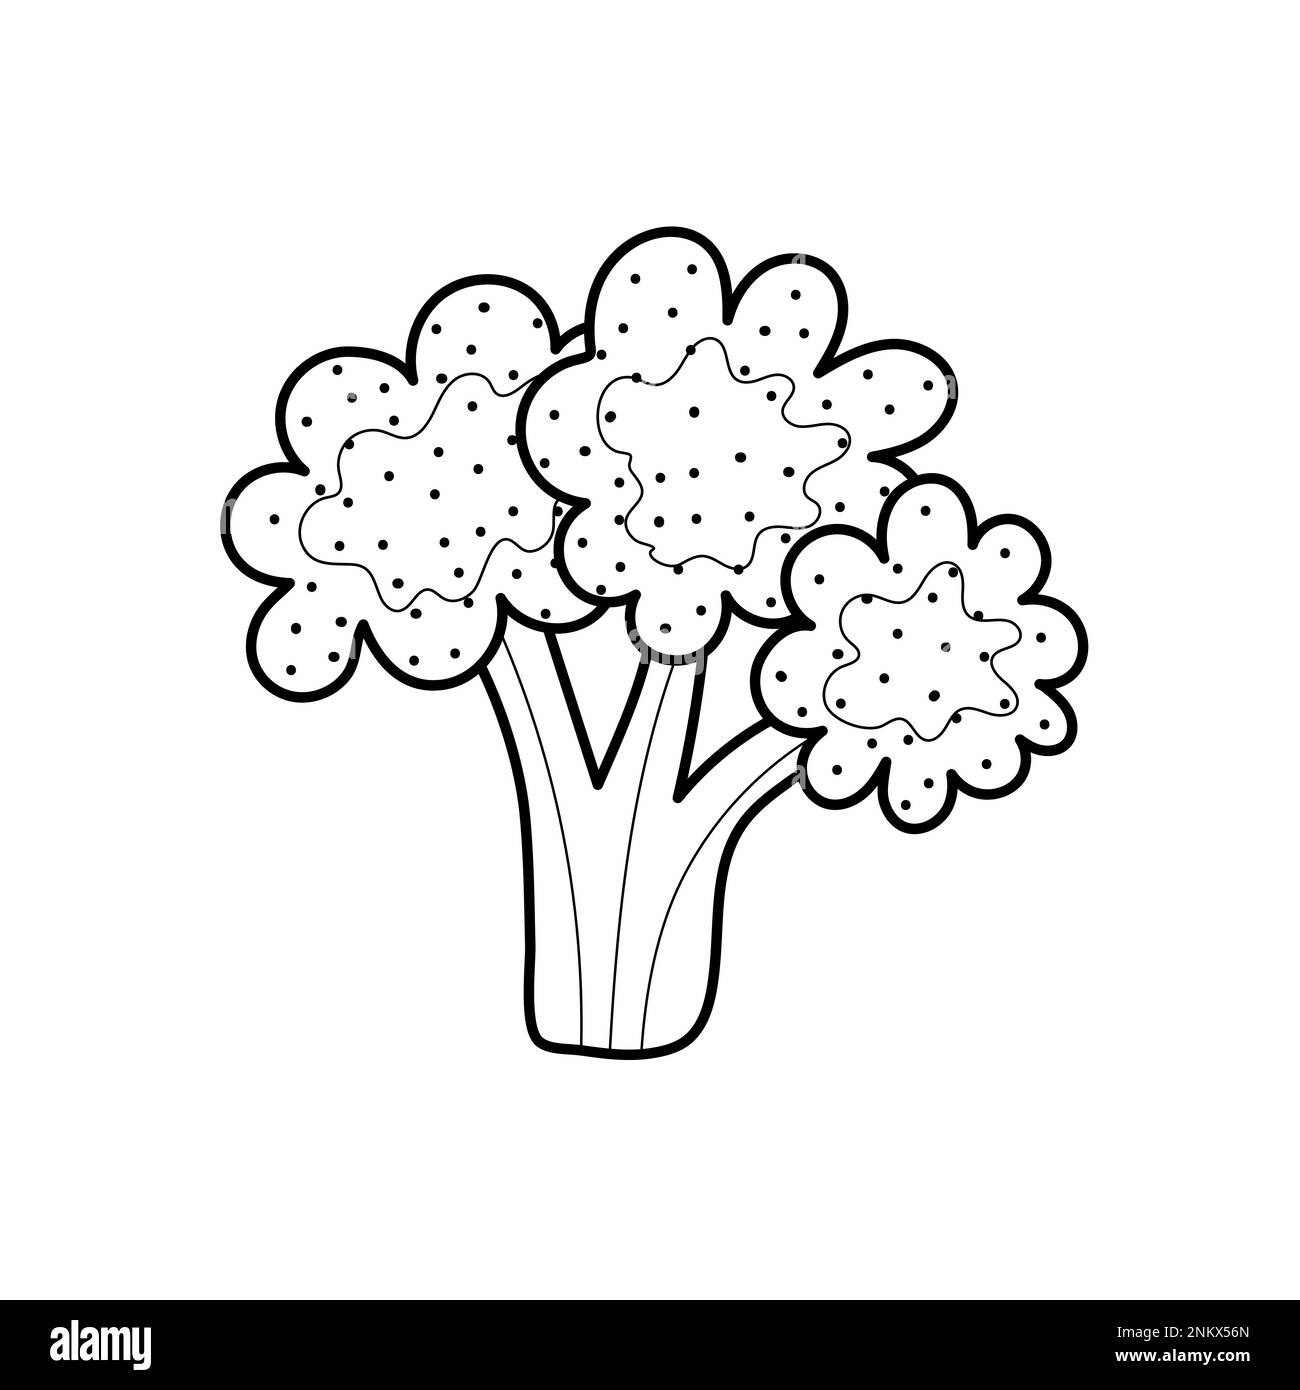 Black and white broccoli isolated on white background. Linear vegetable for coloring book Stock Vector